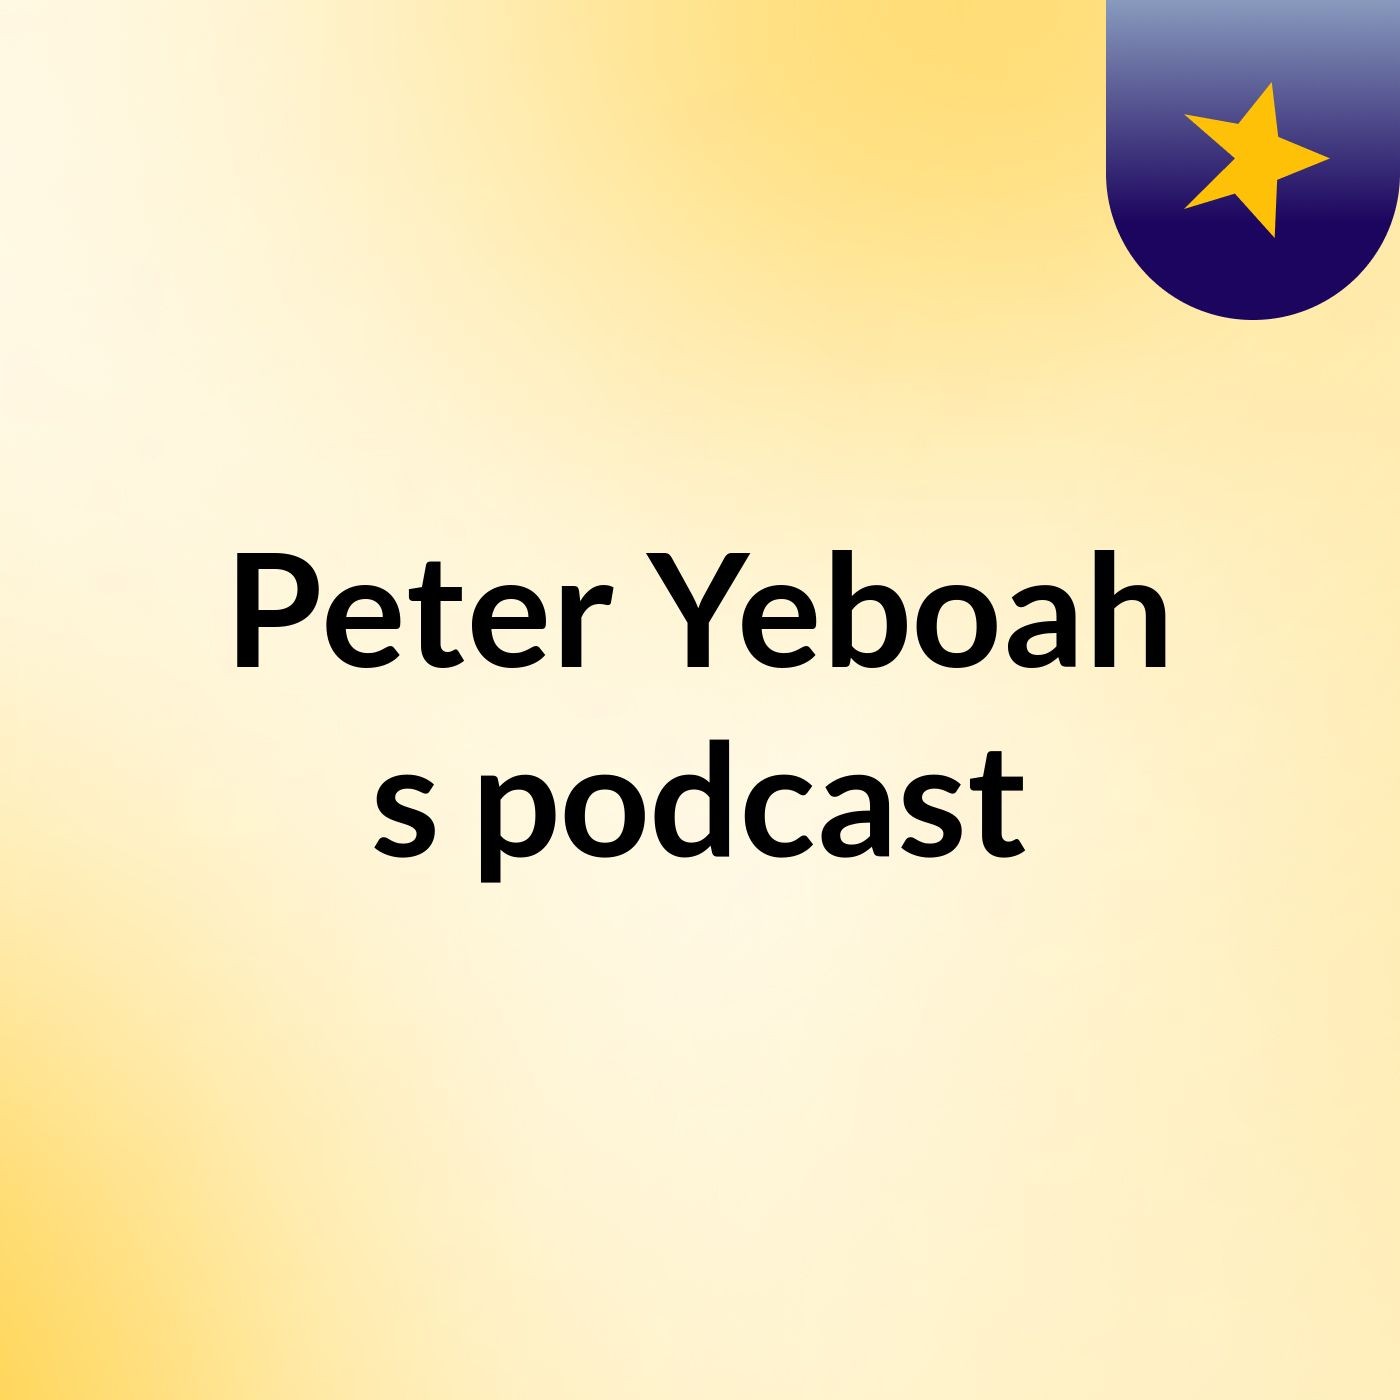 Episode 2 - Peter Yeboah's podcast